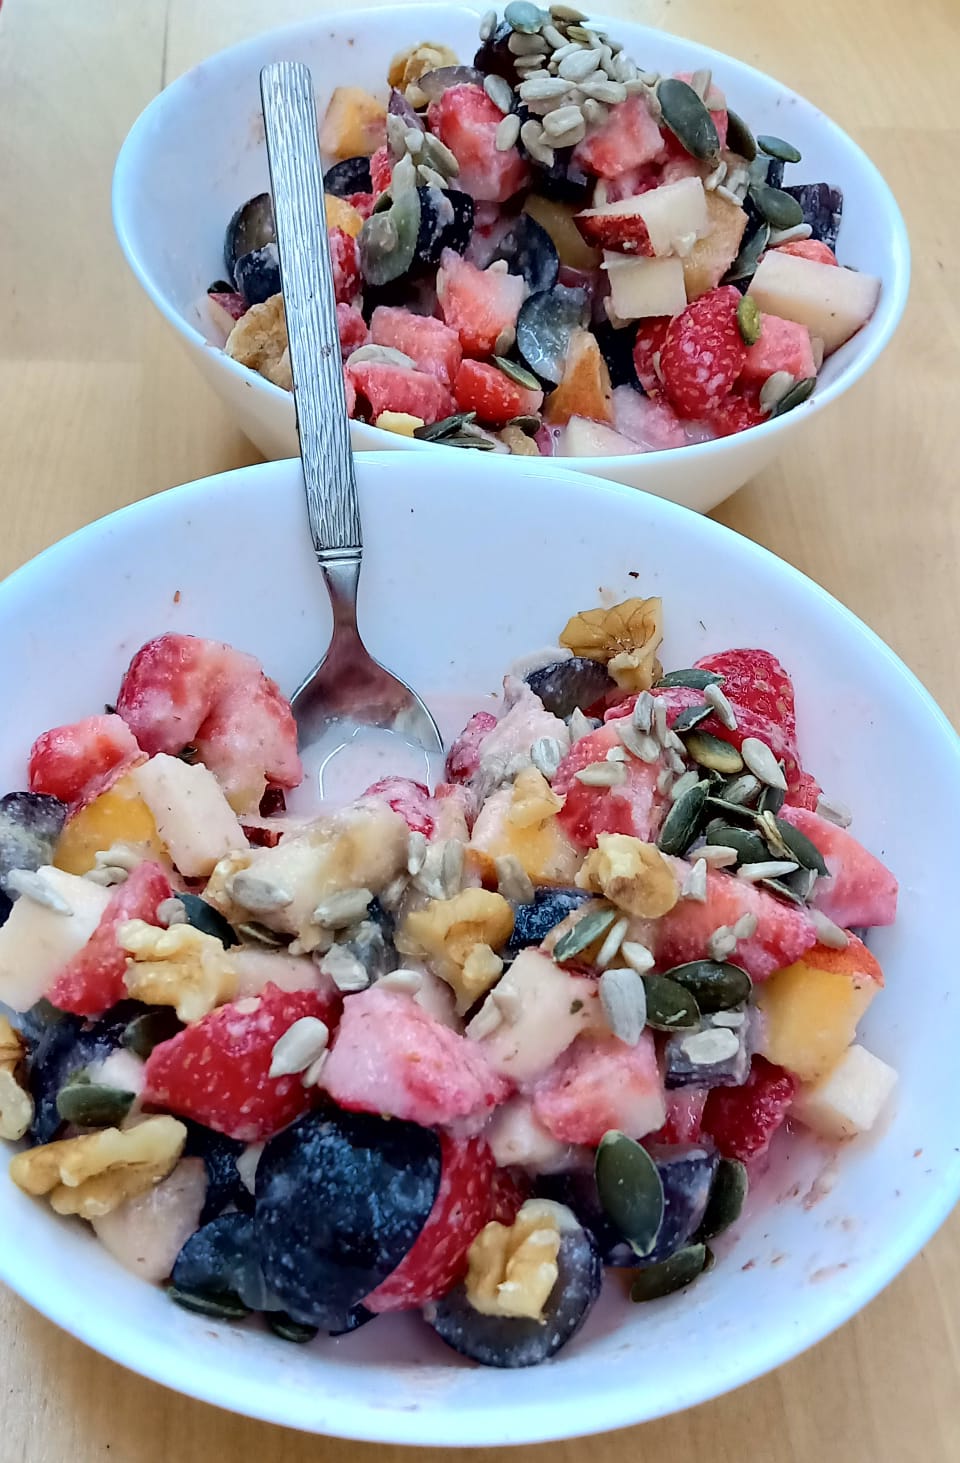 Fruit Salad with Home Made Nut Milk